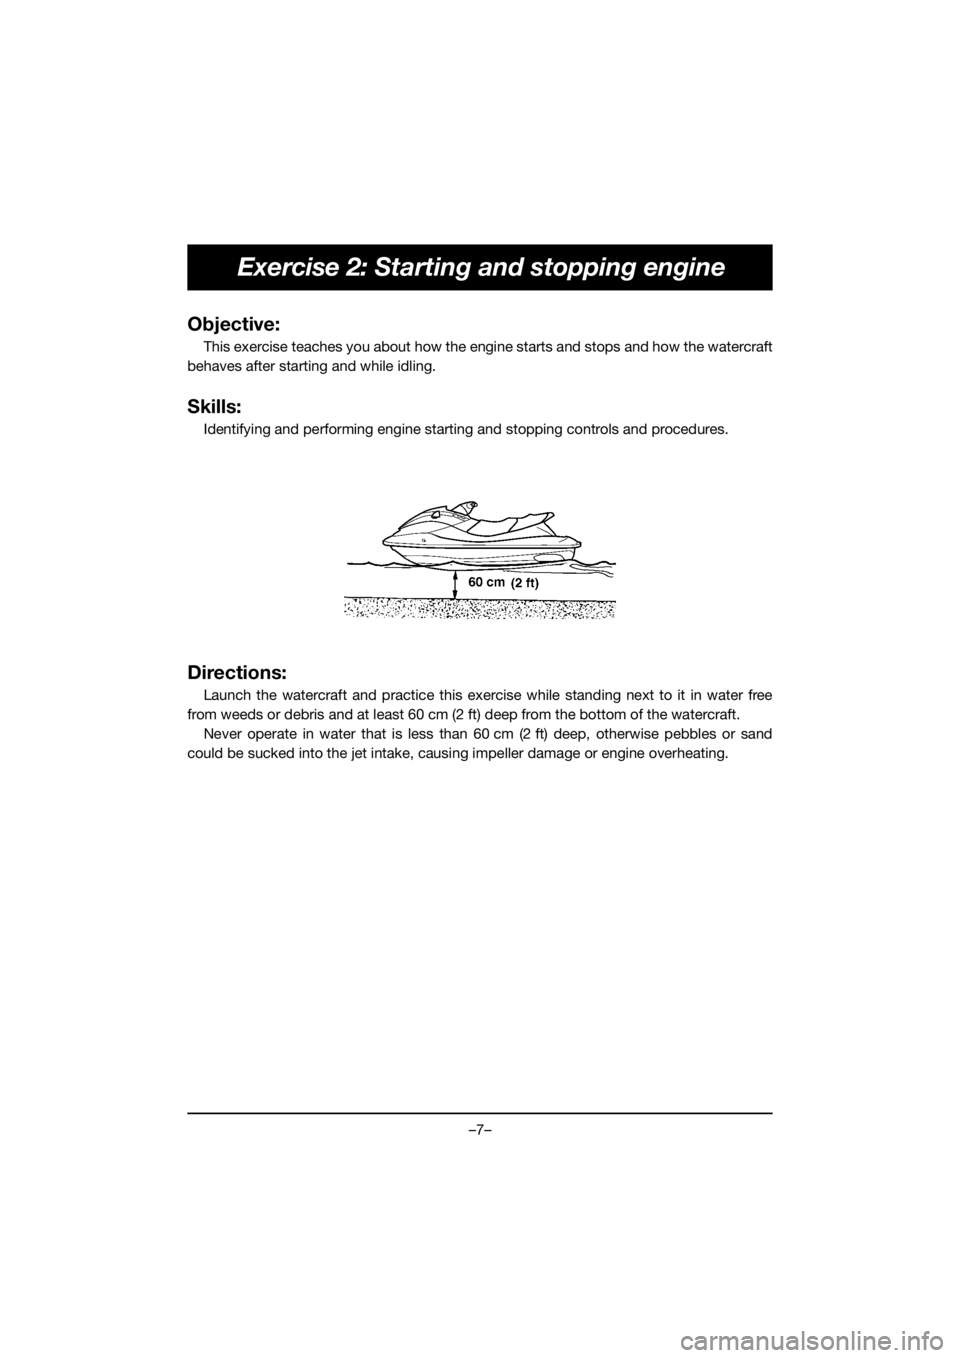 YAMAHA VX CRUISER HO 2020 User Guide –7–
Exercise 2: Starting and stopping engine
Objective:
This exercise teaches you about how the engine starts and stops and how the watercraft
behaves after starting and while idling.
Skills:
Iden